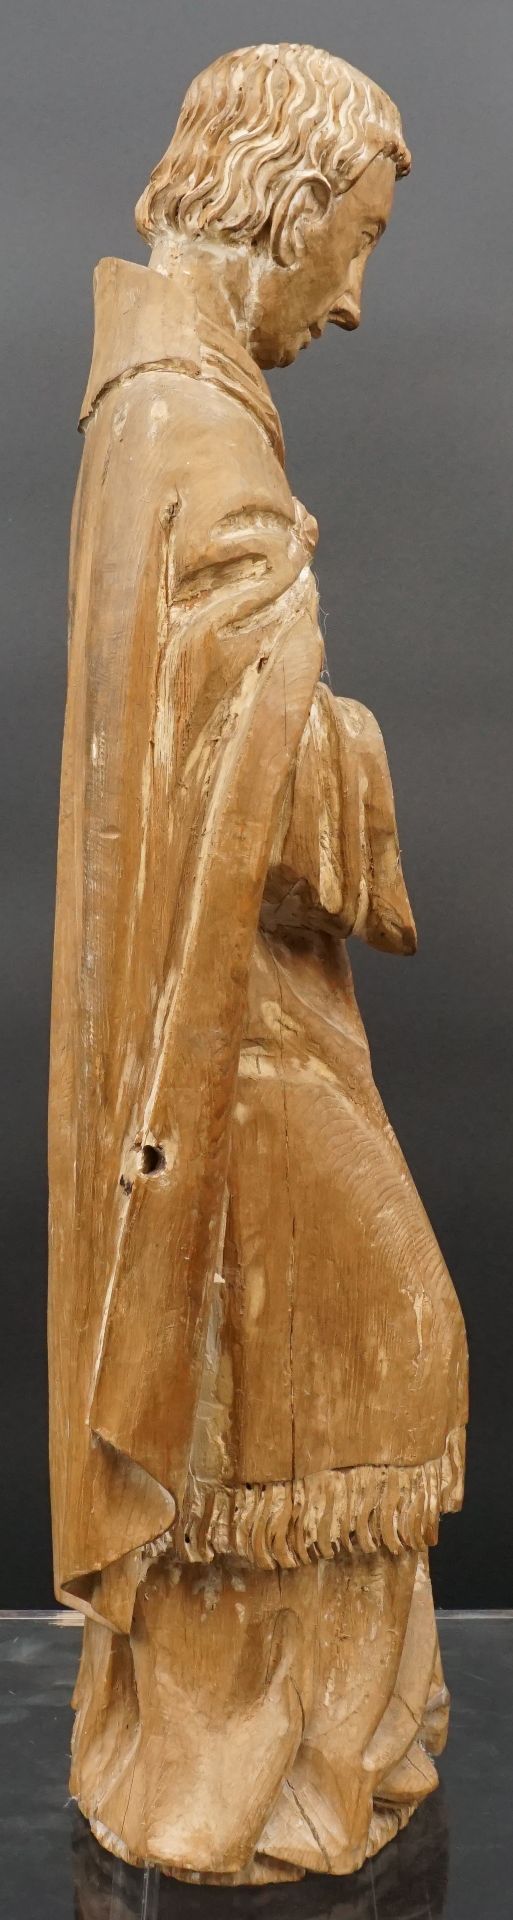 Wooden figure. St. Monk. 19th century. - Image 4 of 14